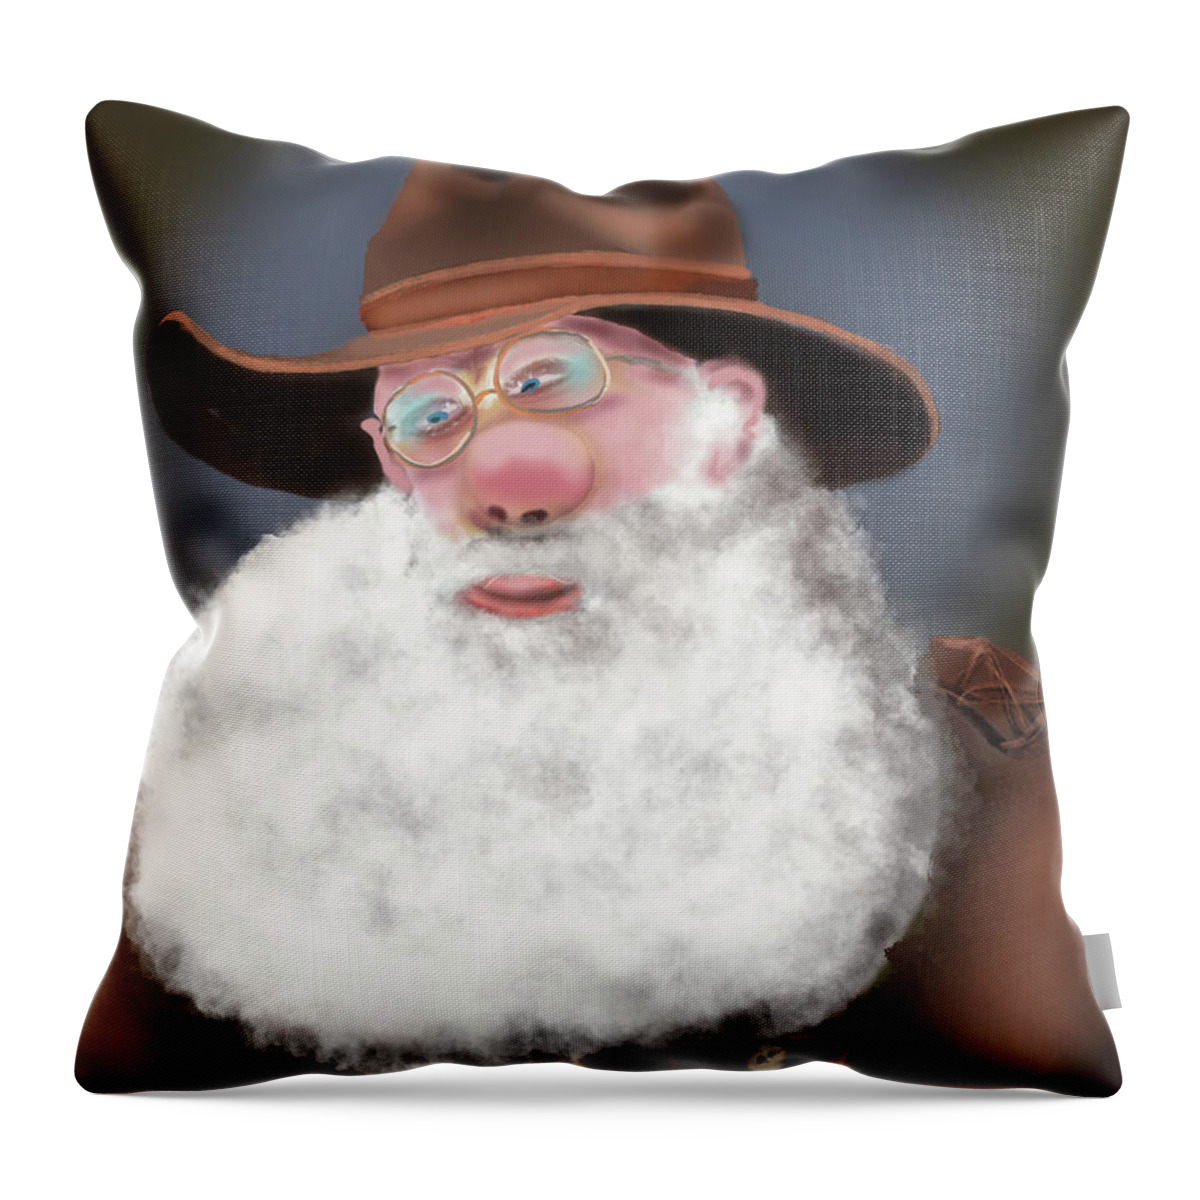 Old Age Throw Pillow featuring the digital art This Old Man by Doug Gist